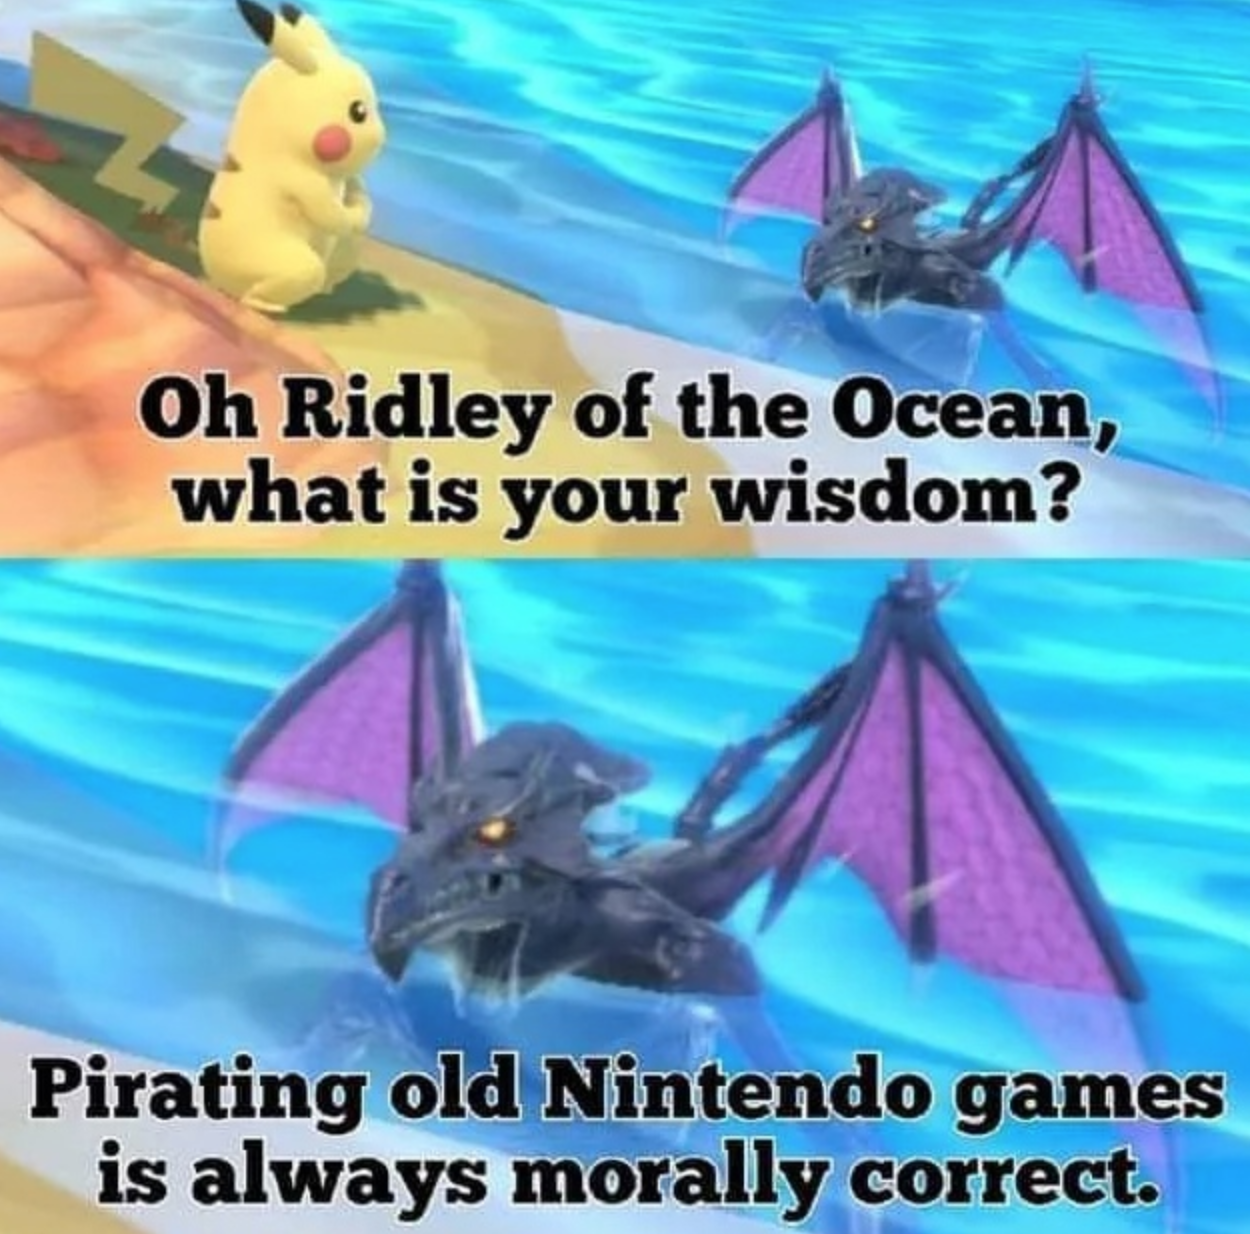 funny gaming memes - fauna - Oh Ridley of the Ocean, what is your wisdom? Pirating old Nintendo games is always morally correct.